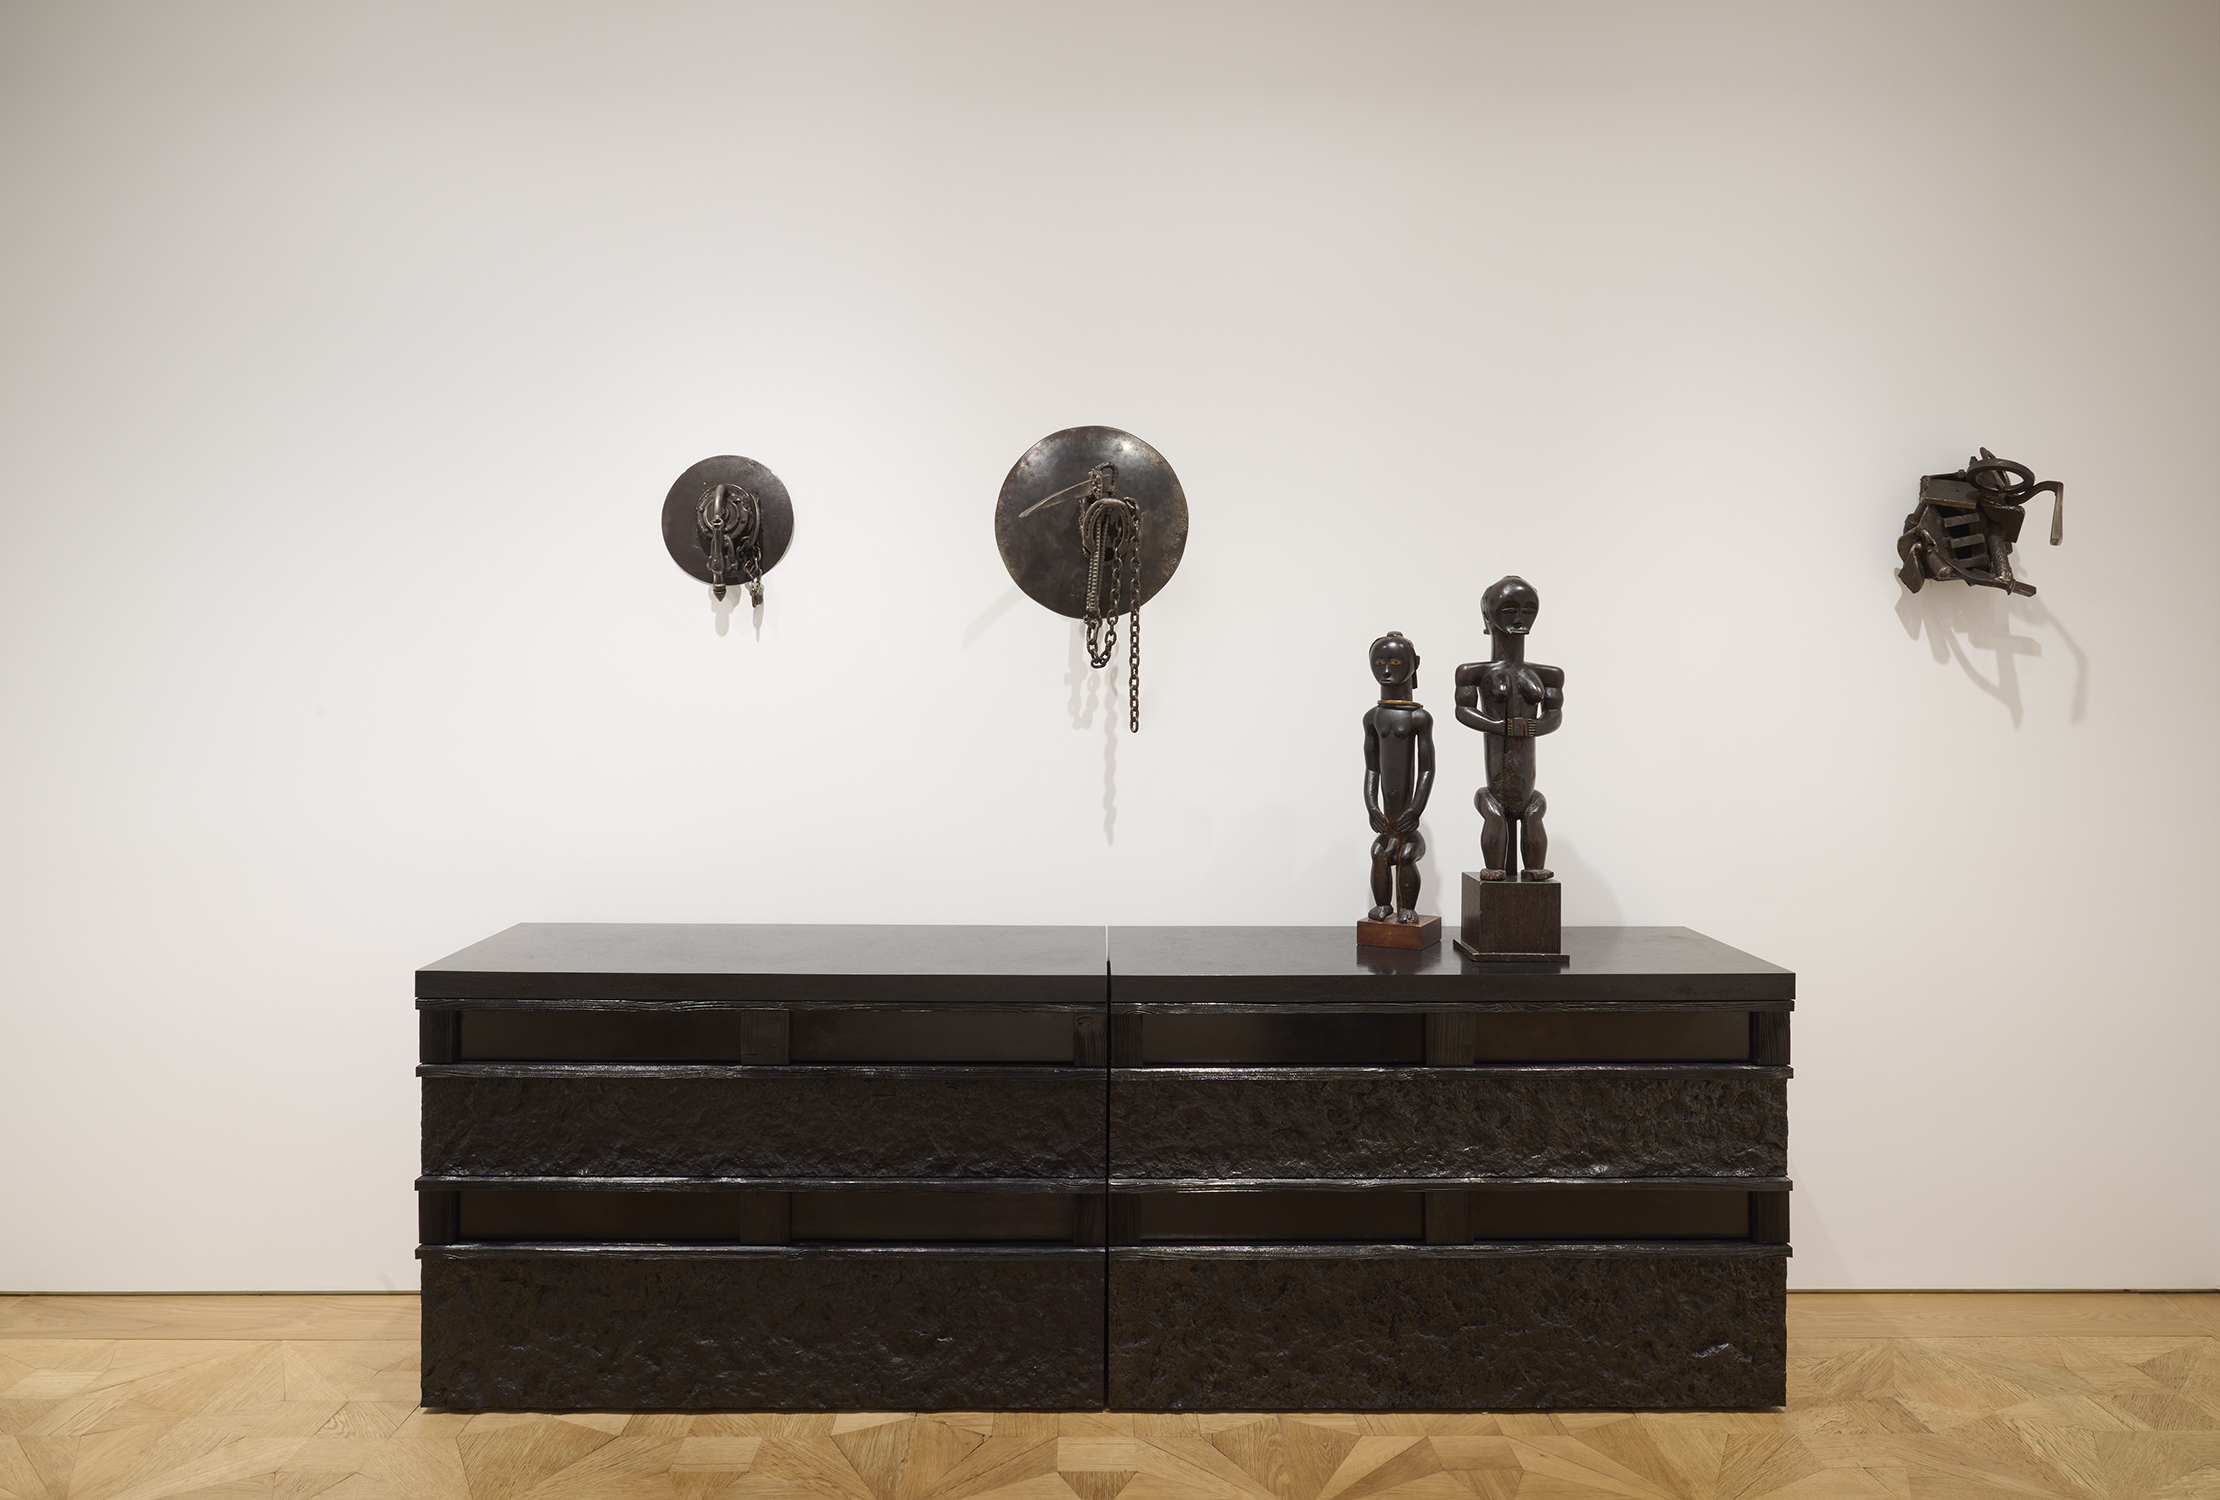 Sculptural works by Melvin Edwards is on view at Peter Marino Art Foundation. JASON SCHMIDT